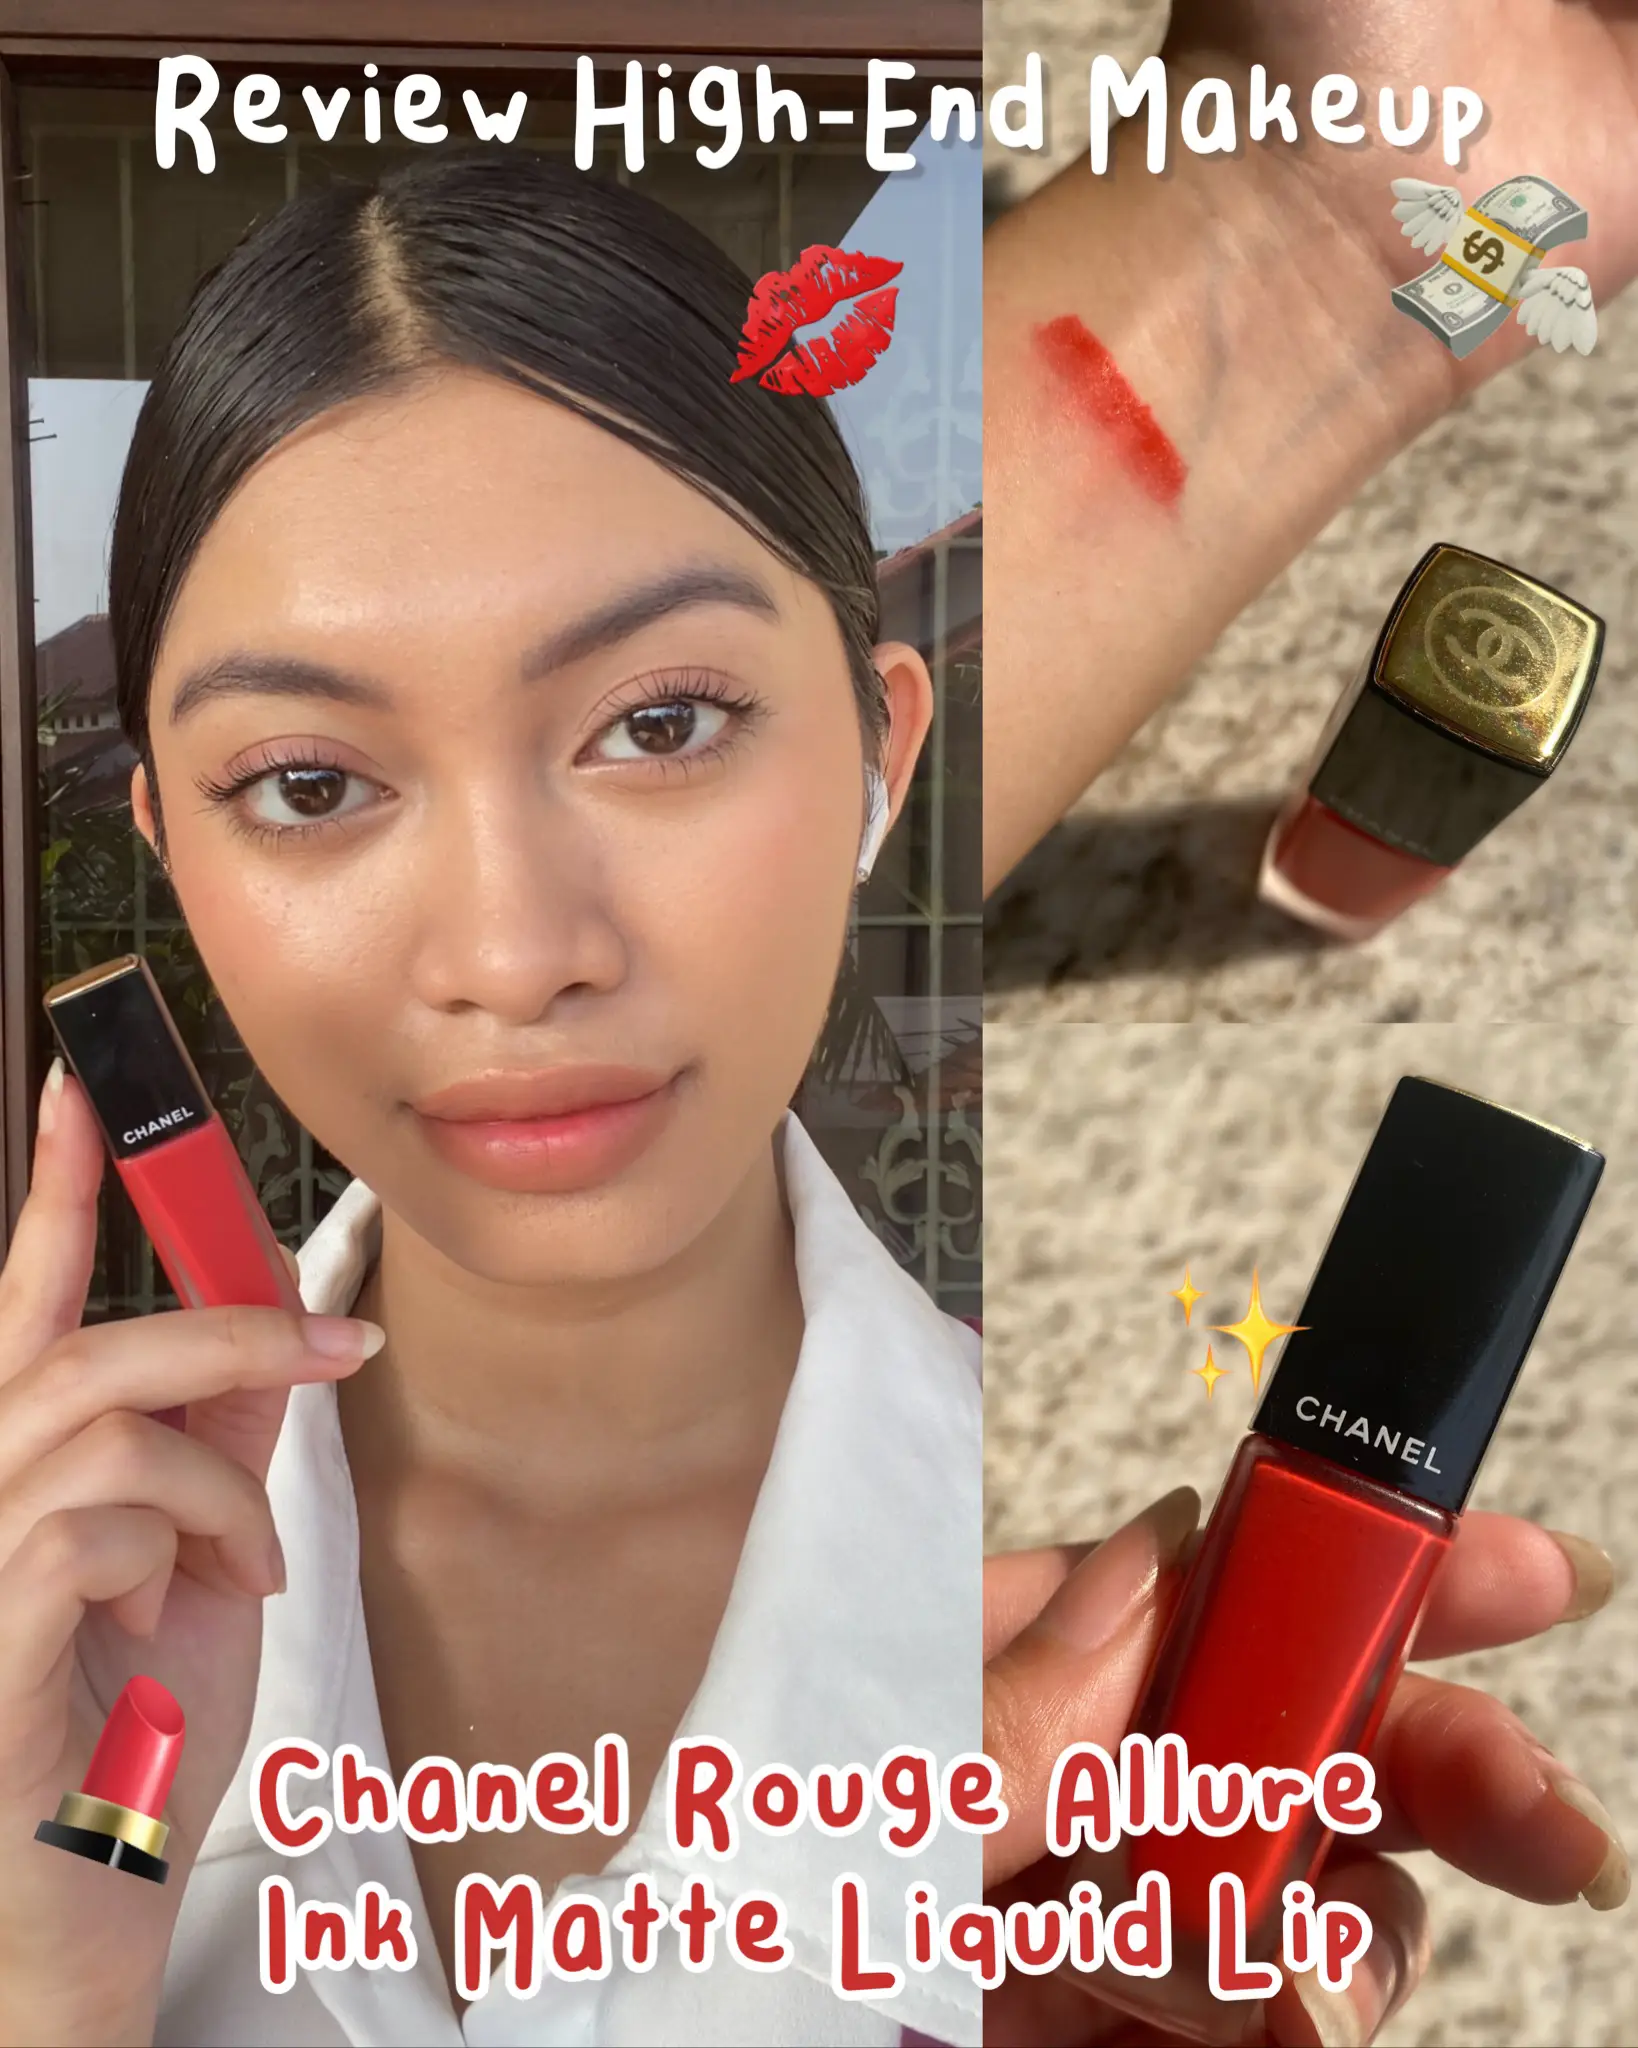 Review High-End Makeup: Chanel Liquid Lip, Video published by aliarana